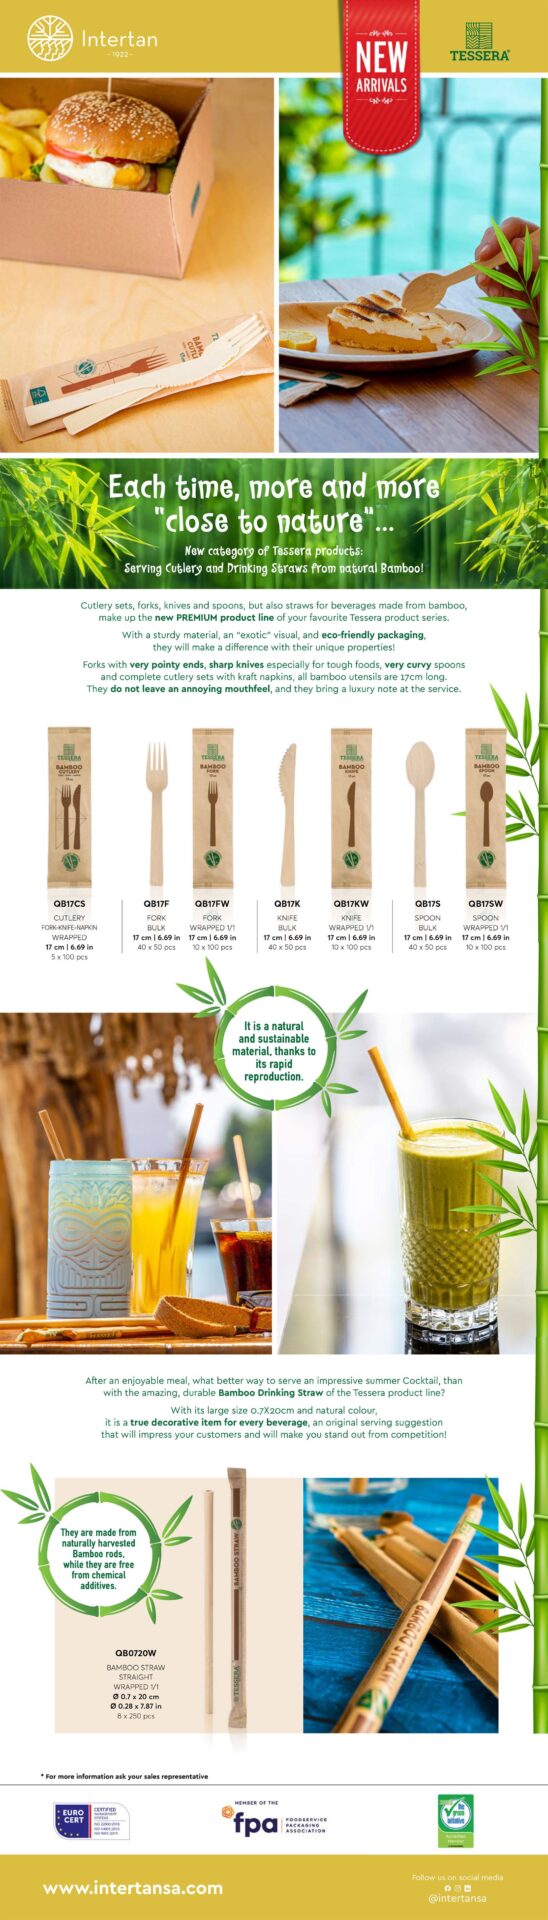 New Premium Straws & Cutlery from Bamboo Newsletter | Intertan S.A.